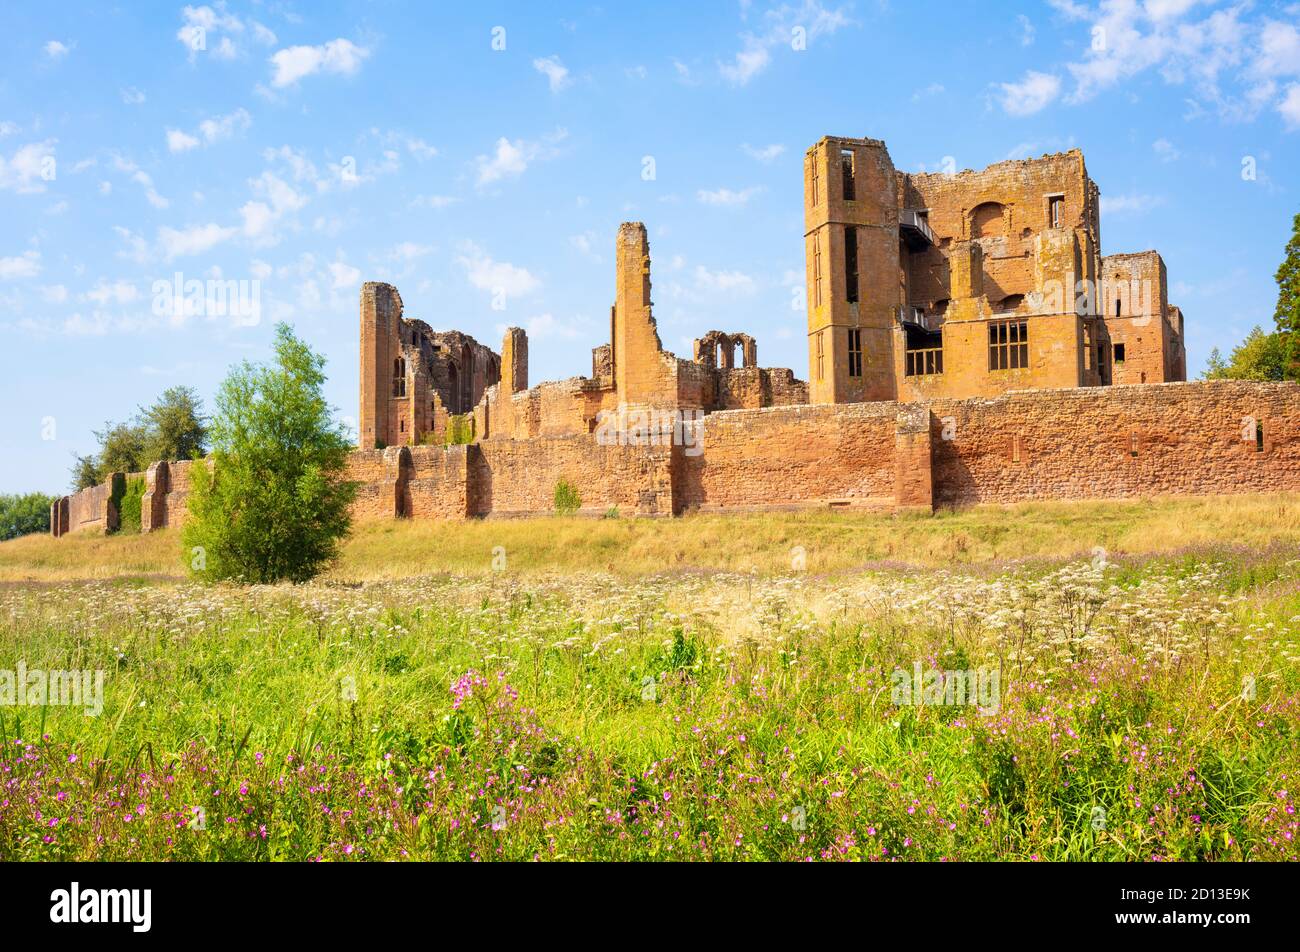 Kenilworth Castle ruins and keep which is norman architecture and over 500 years old Kenilworth Warwickshire England uk gb Europe Stock Photo